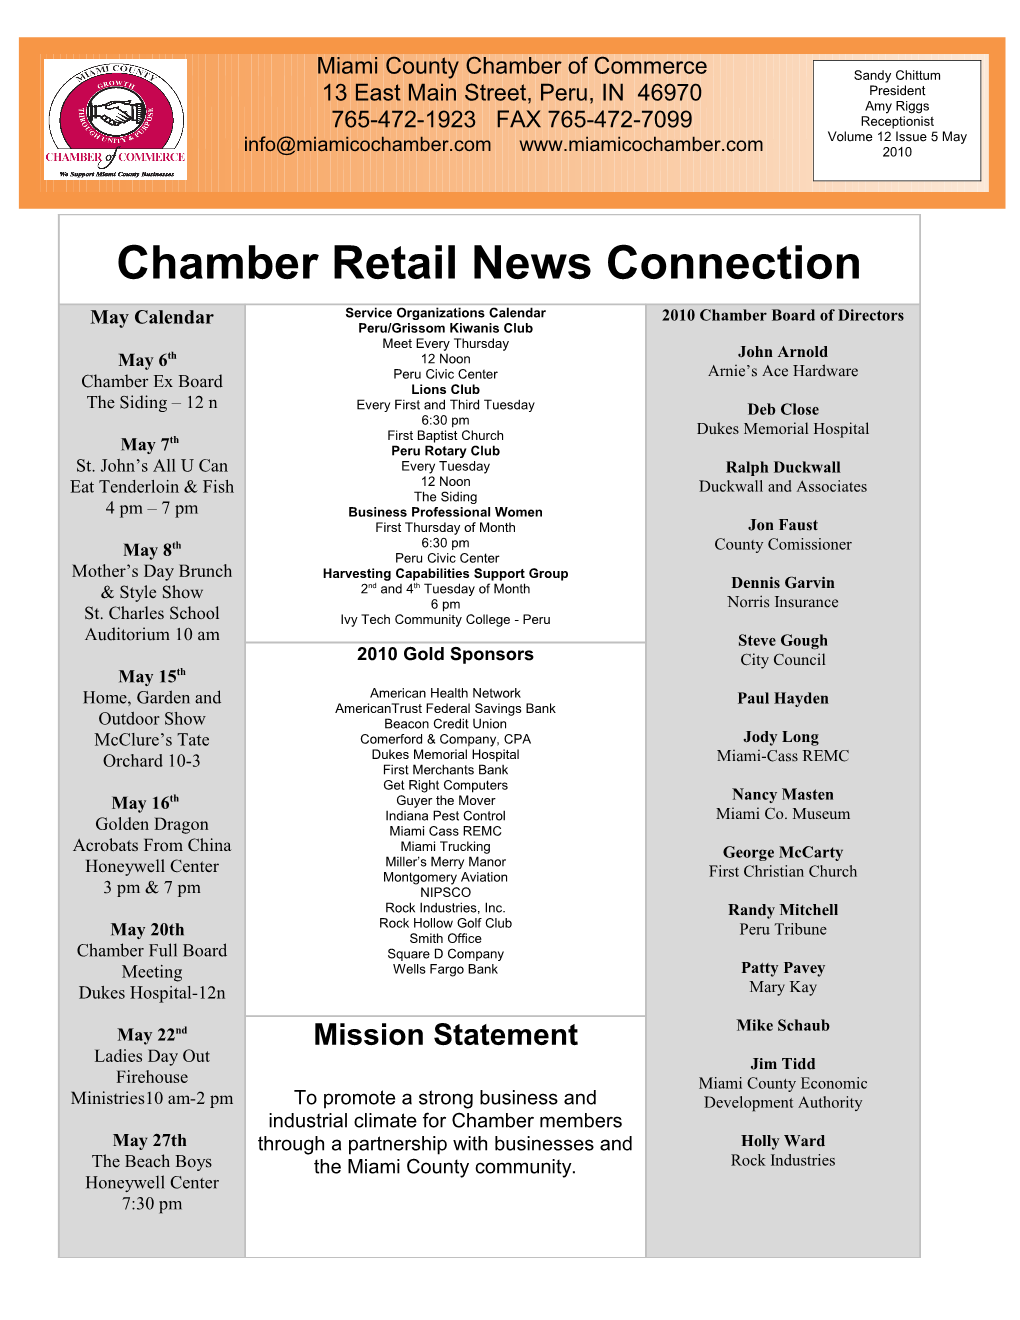 Chamber Retail News Connection